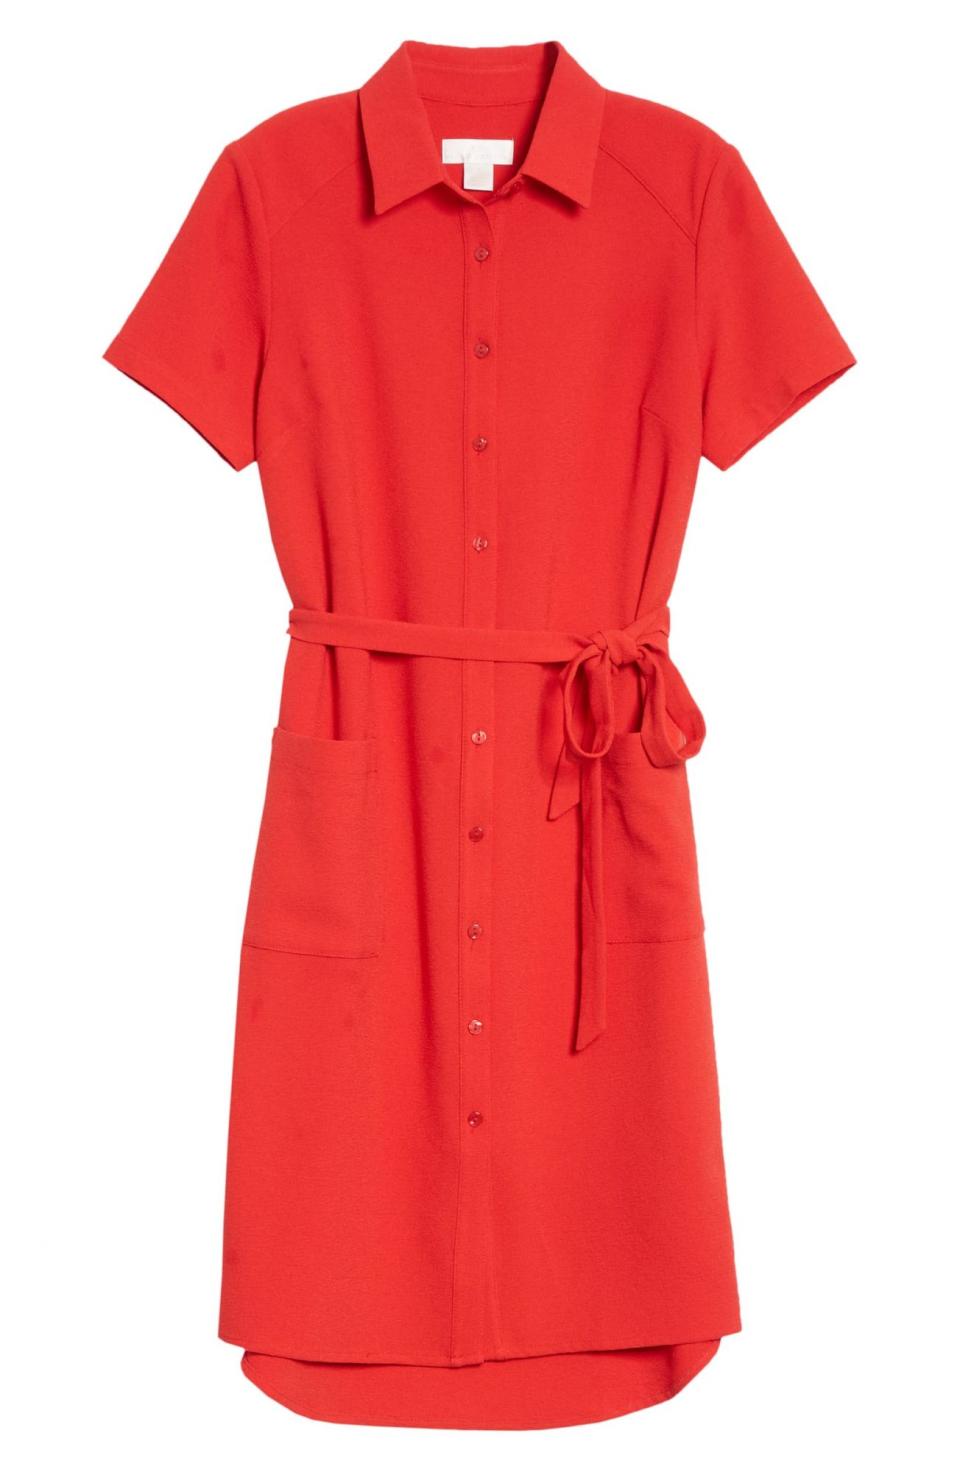 Rachel Parcell Everyday Shirtdress in Red Barbados